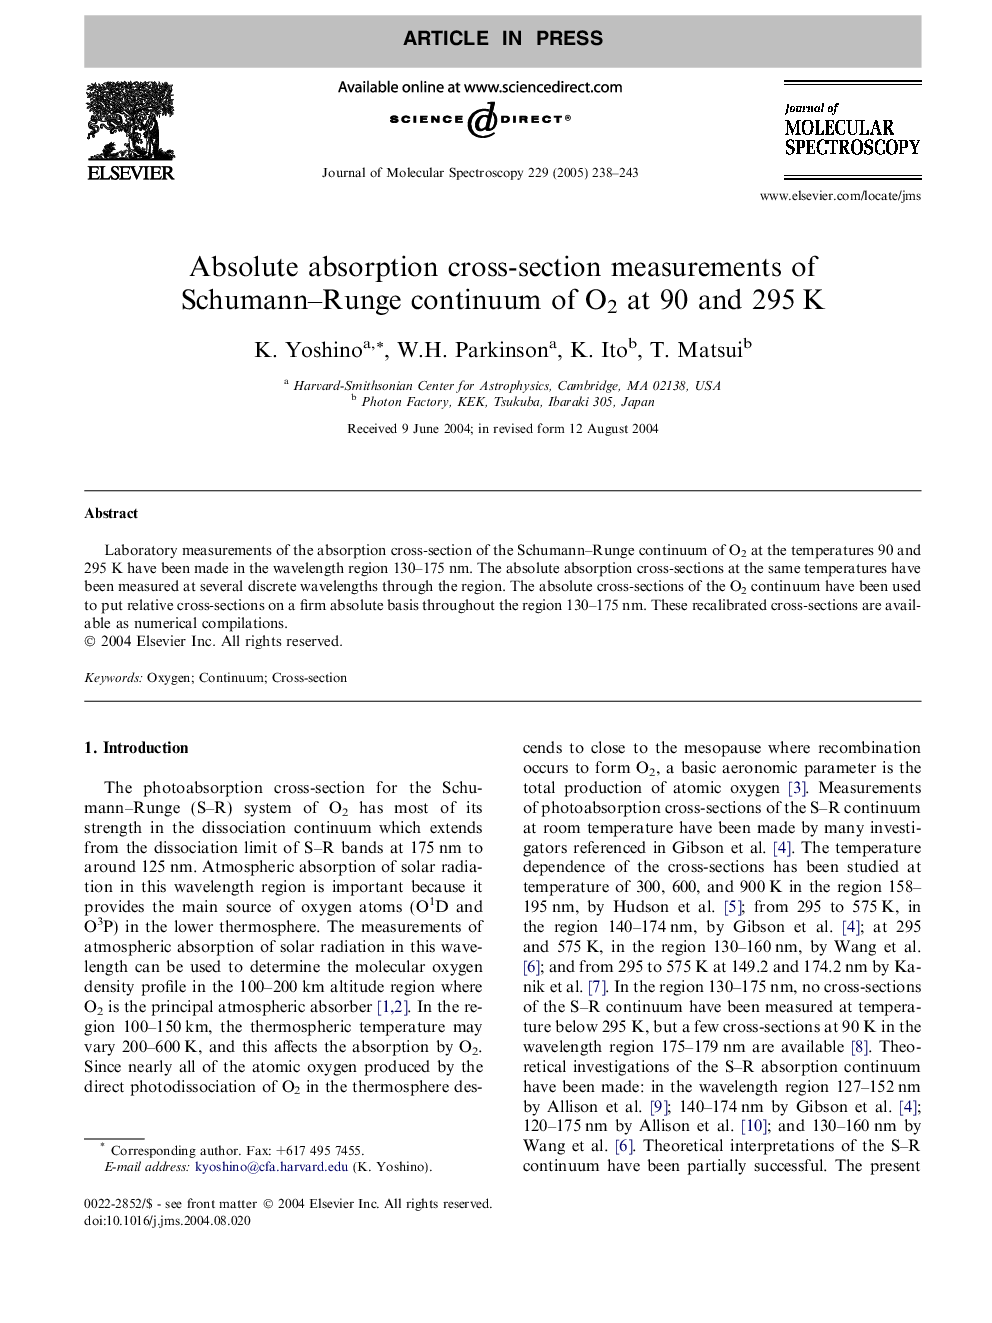 Absolute absorption cross-section measurements of Schumann-Runge continuum of O2 at 90 and 295Â K